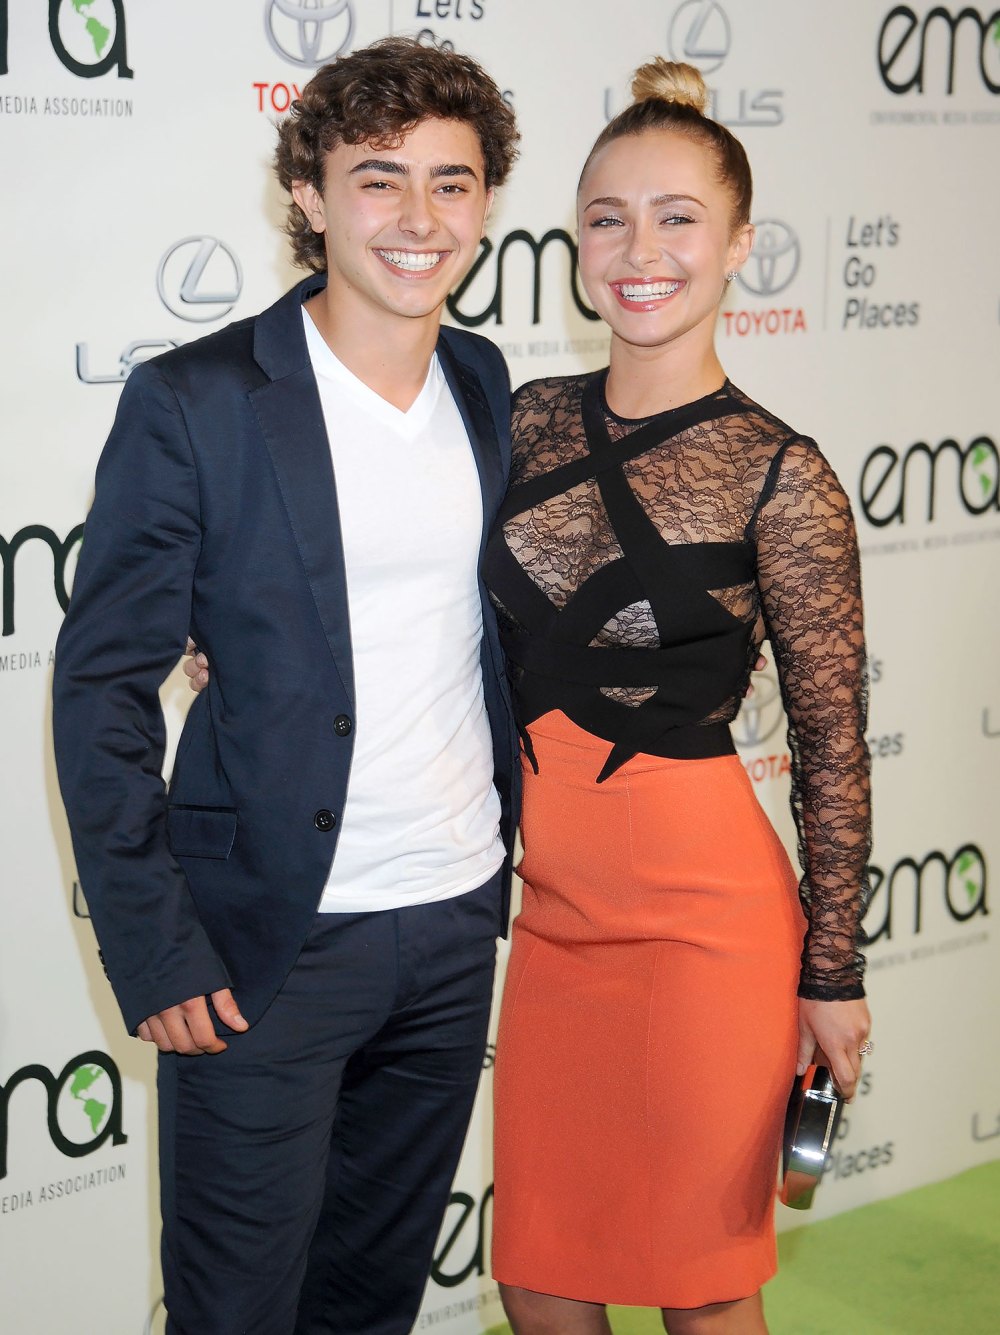 Hayden Panettiere Remembers Late Brother on 1st Anniversary of His Death